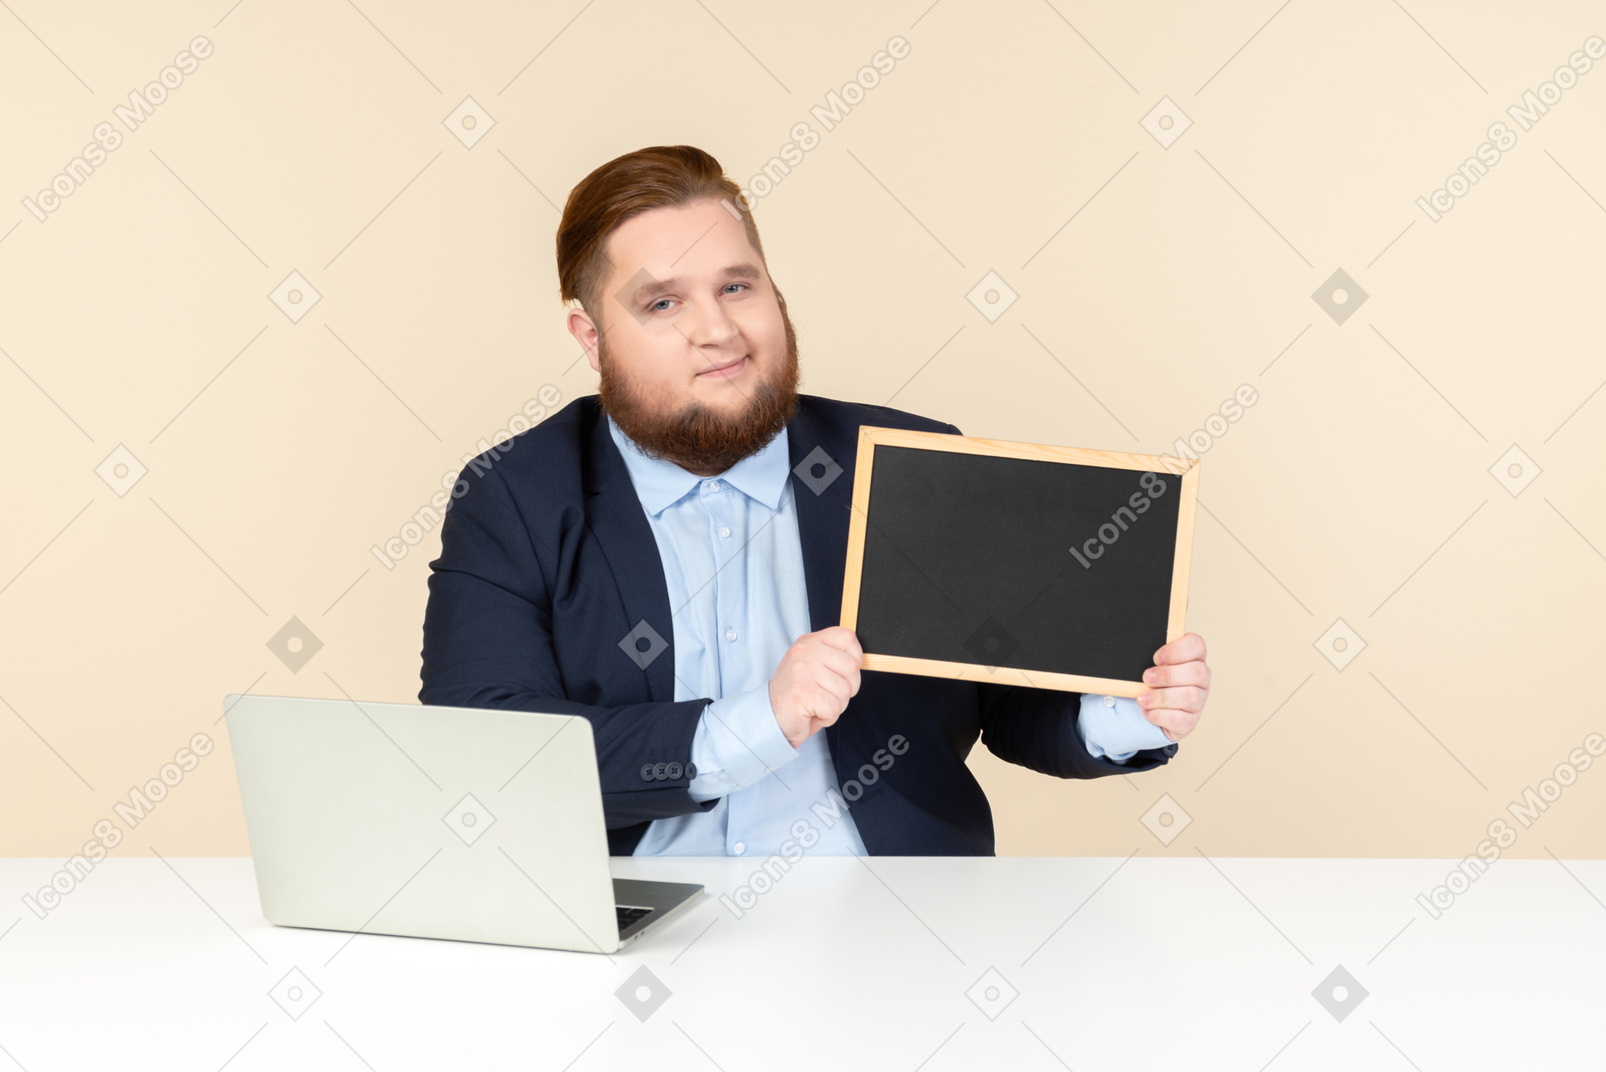 Man in a suit with a laptop